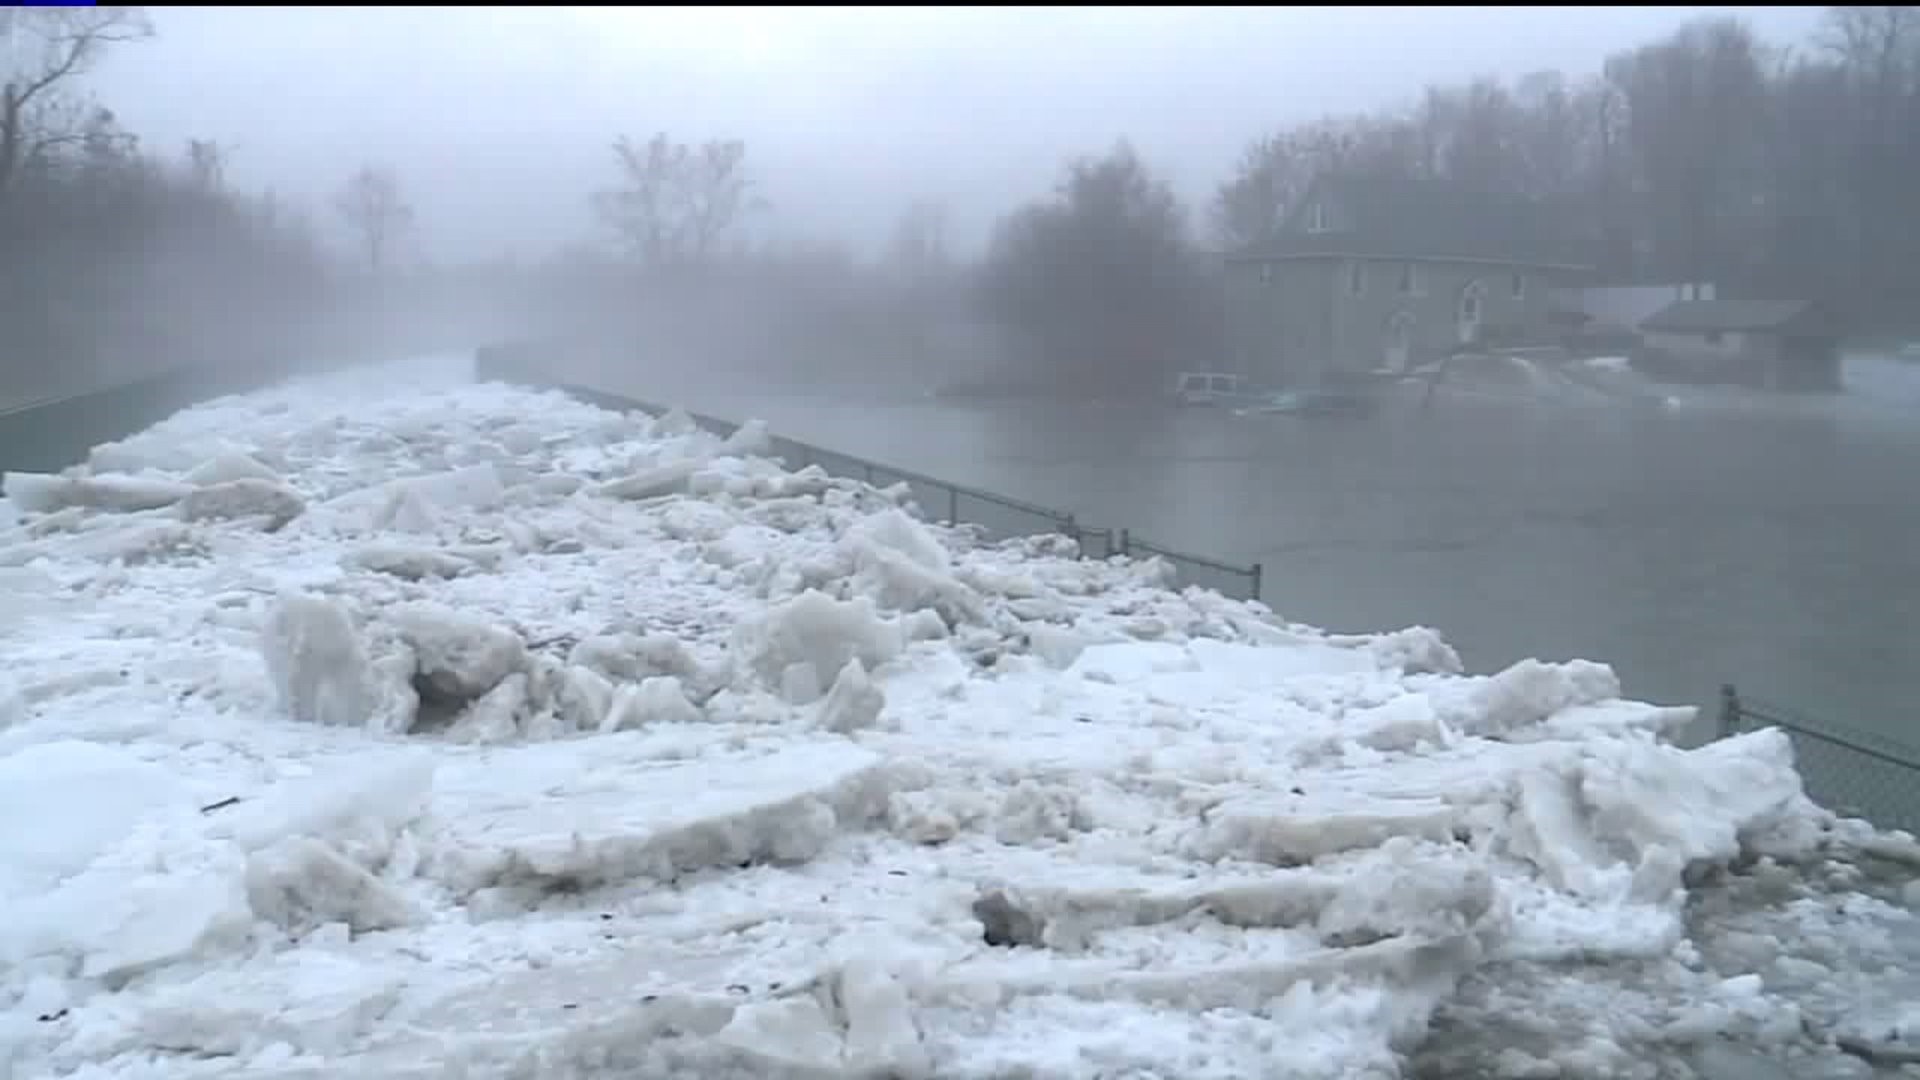 New Proposal to Deal with Flooding in Luzerne County